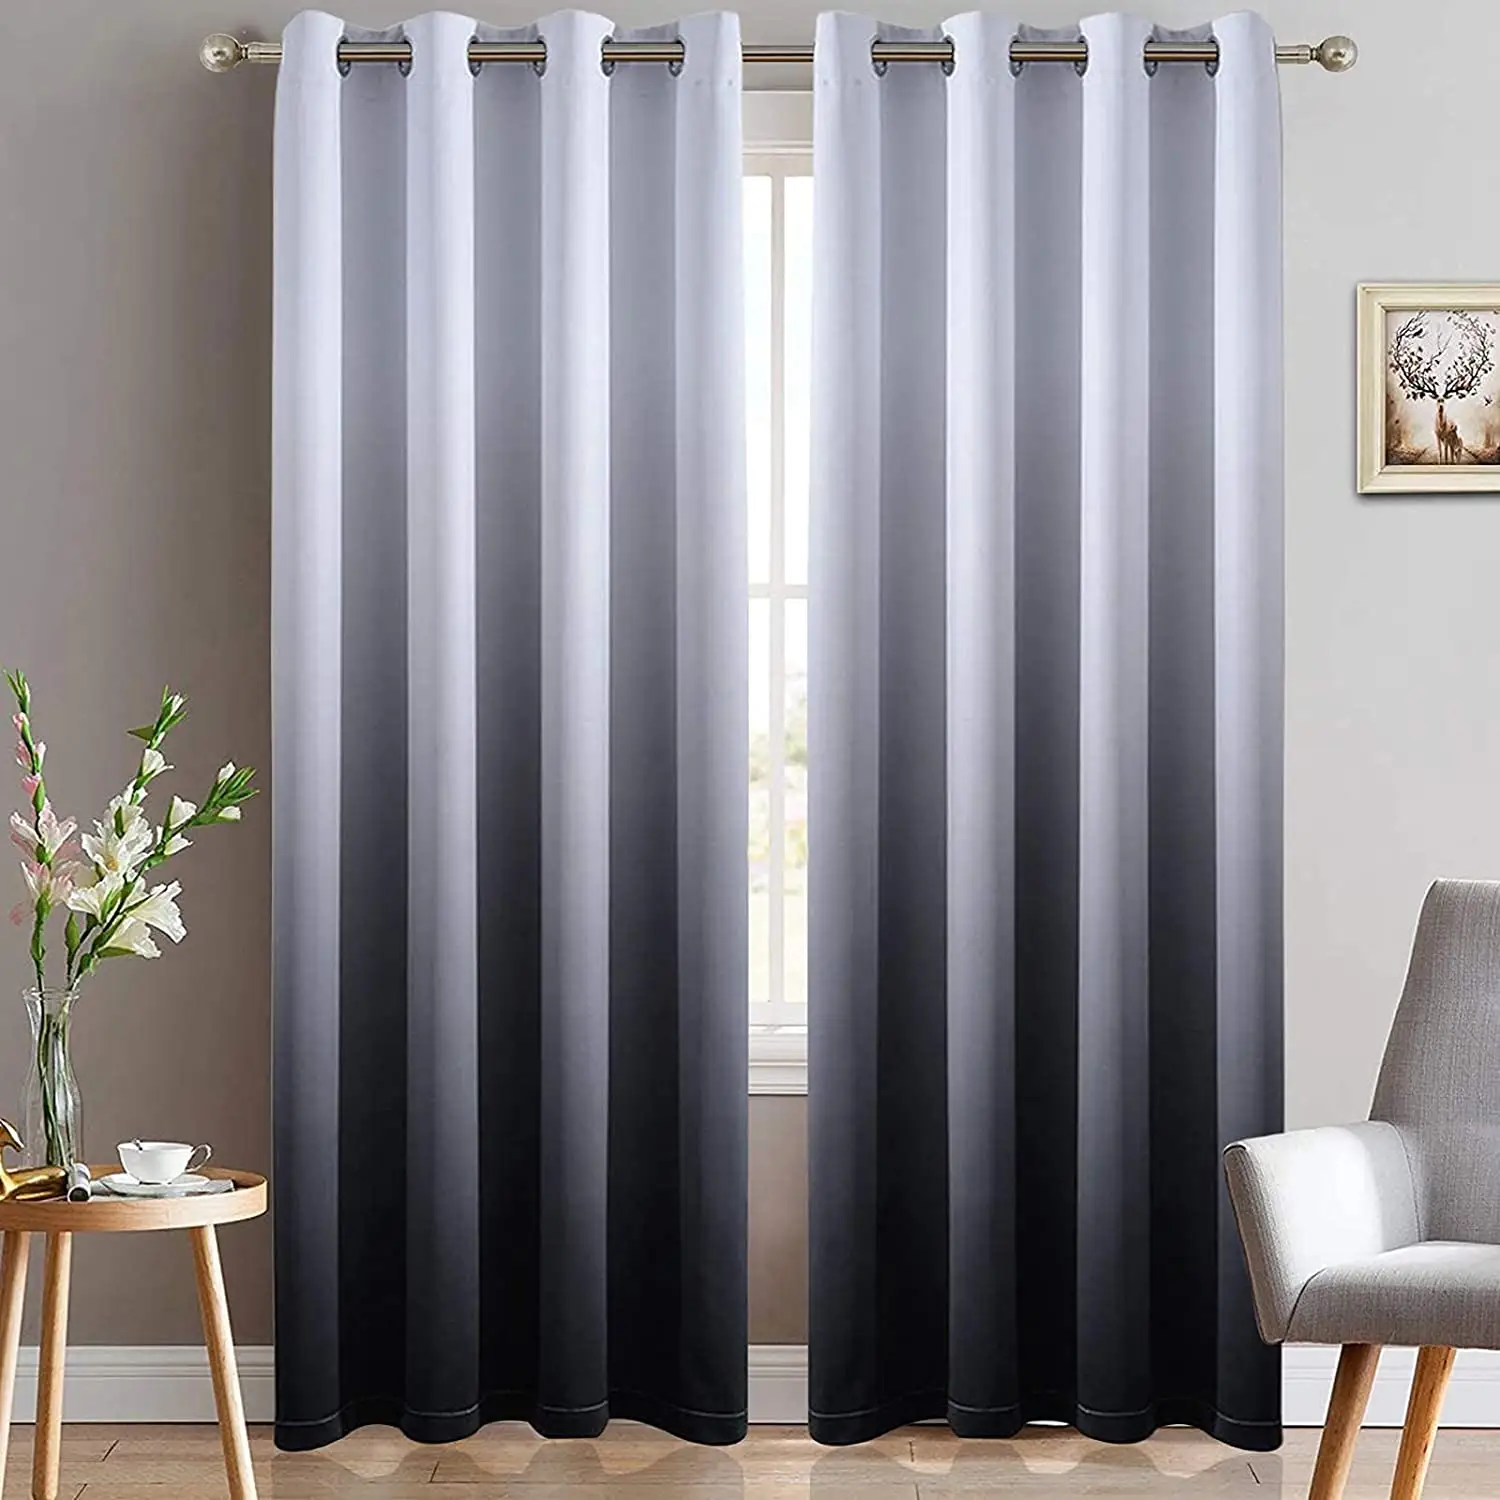 American style wholesale ready bedroom cheap 100% blackout ring curtain for windows living room hotel curtain wholesale factory